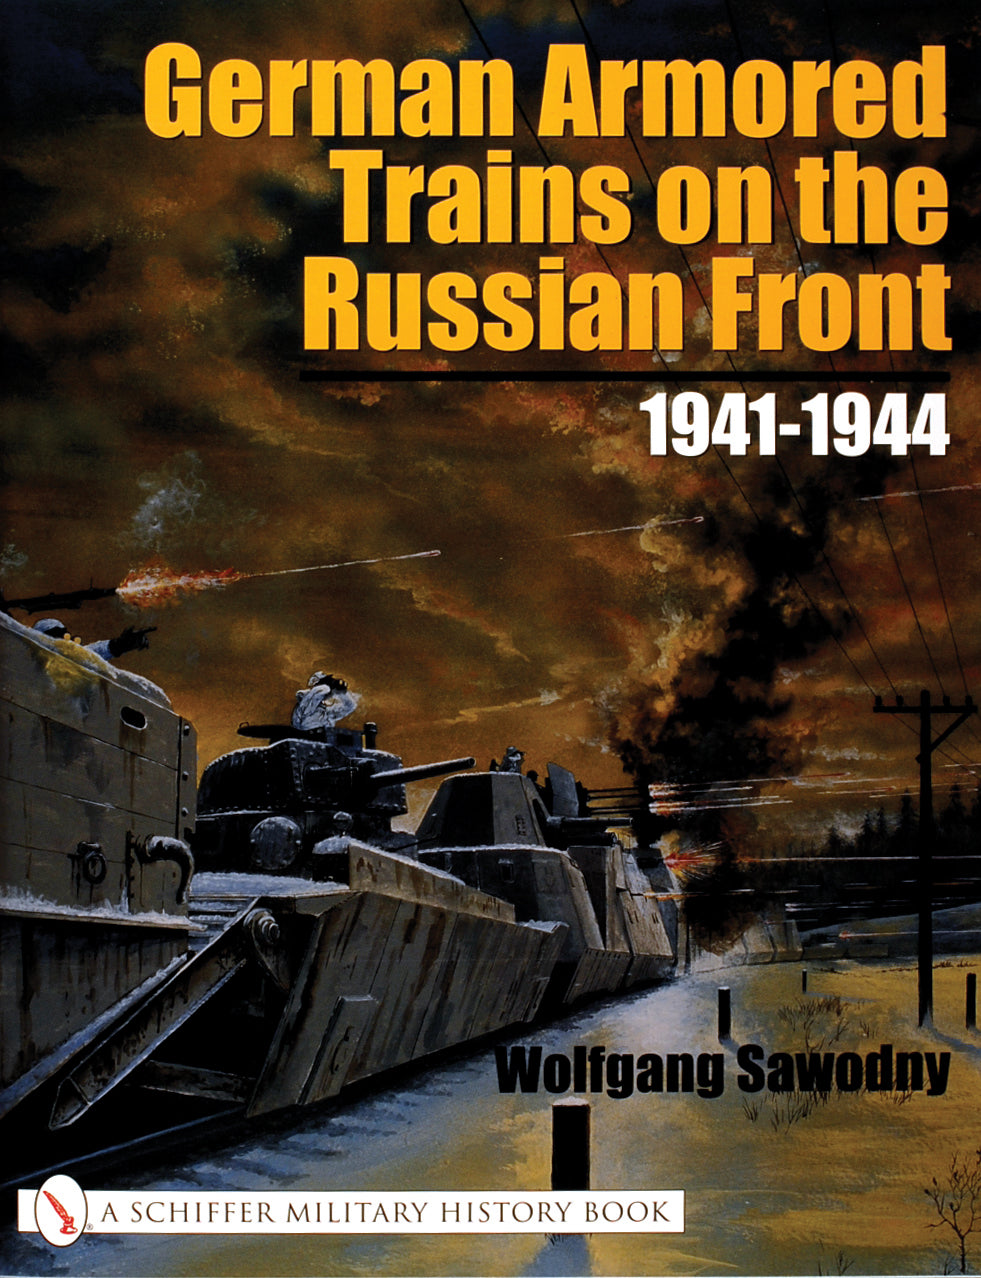 German Armored Trains on the Russian Front